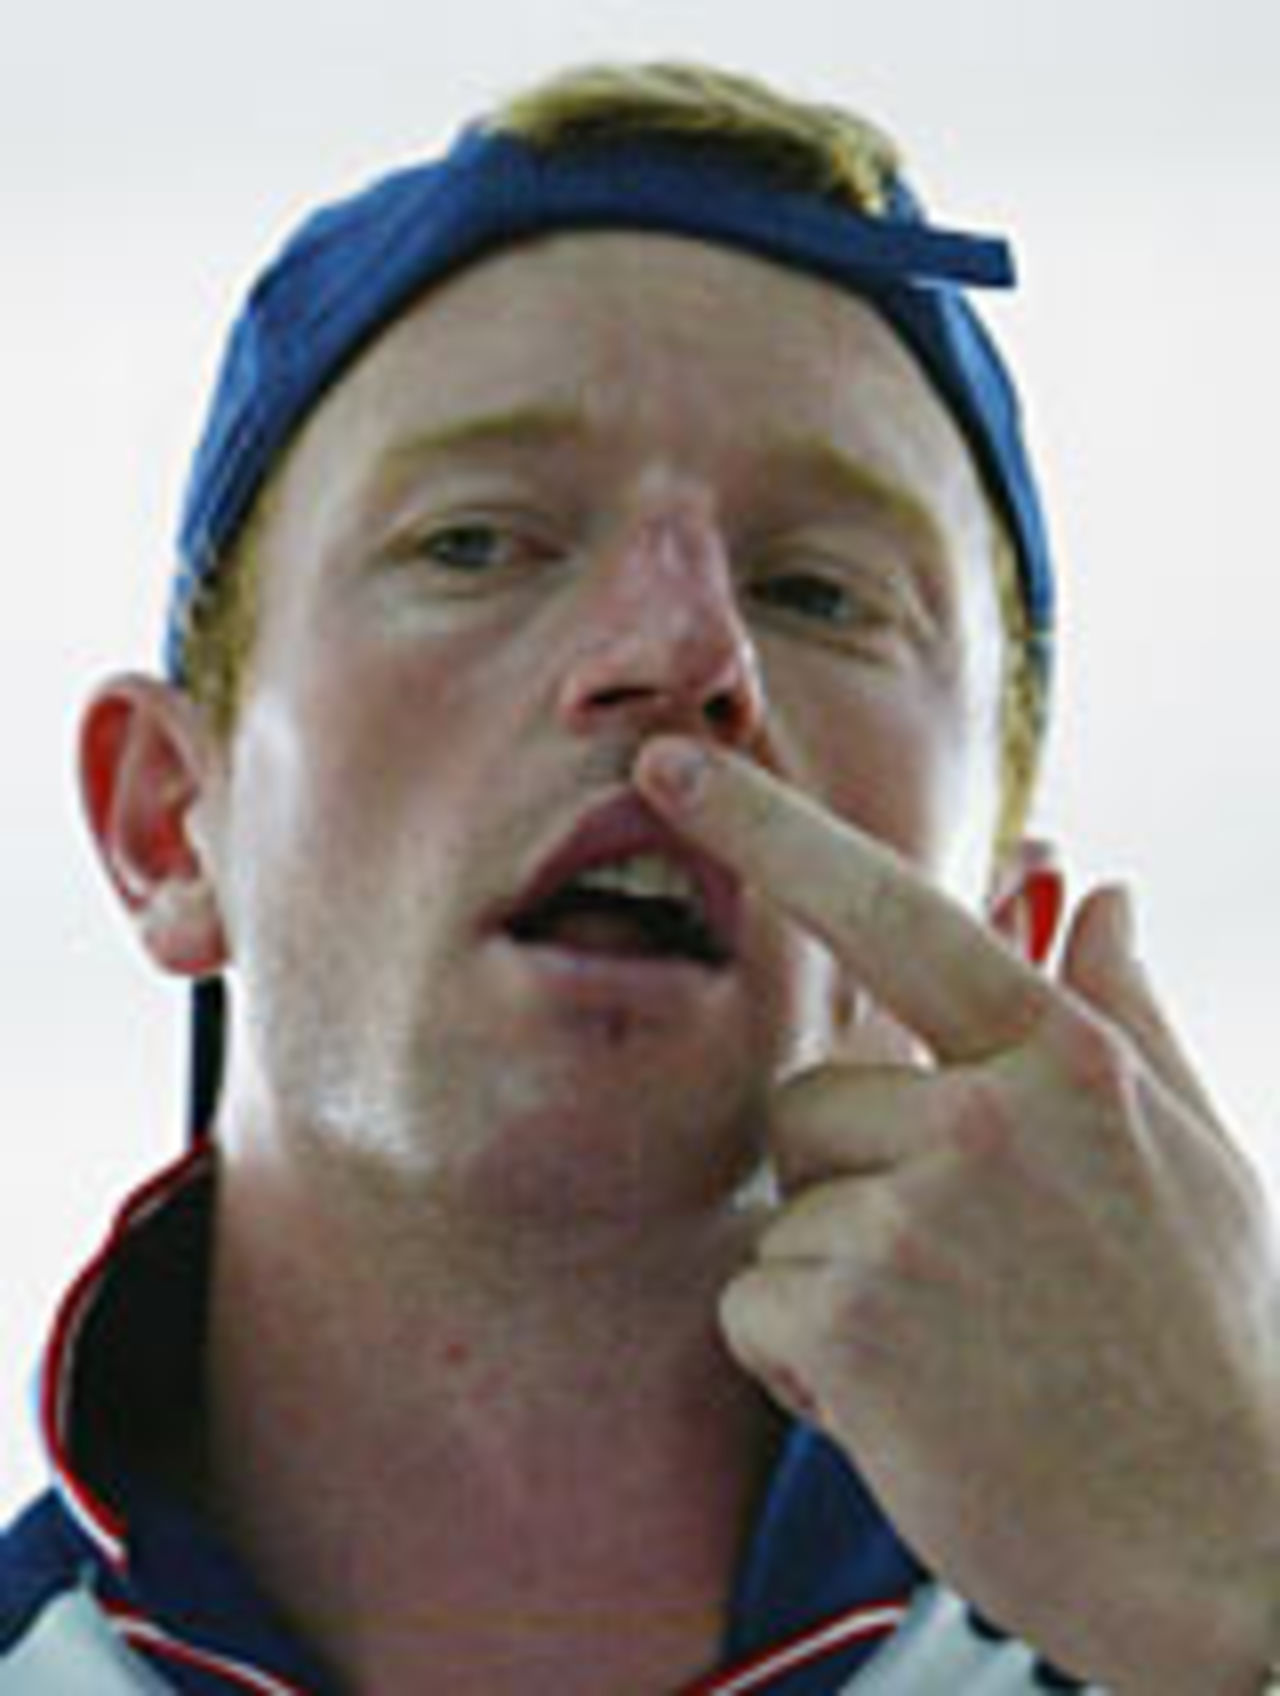 Paul Collingwood shows where he broke his nose after running in to the post while playing basketball , Grenada, April 27, 2004